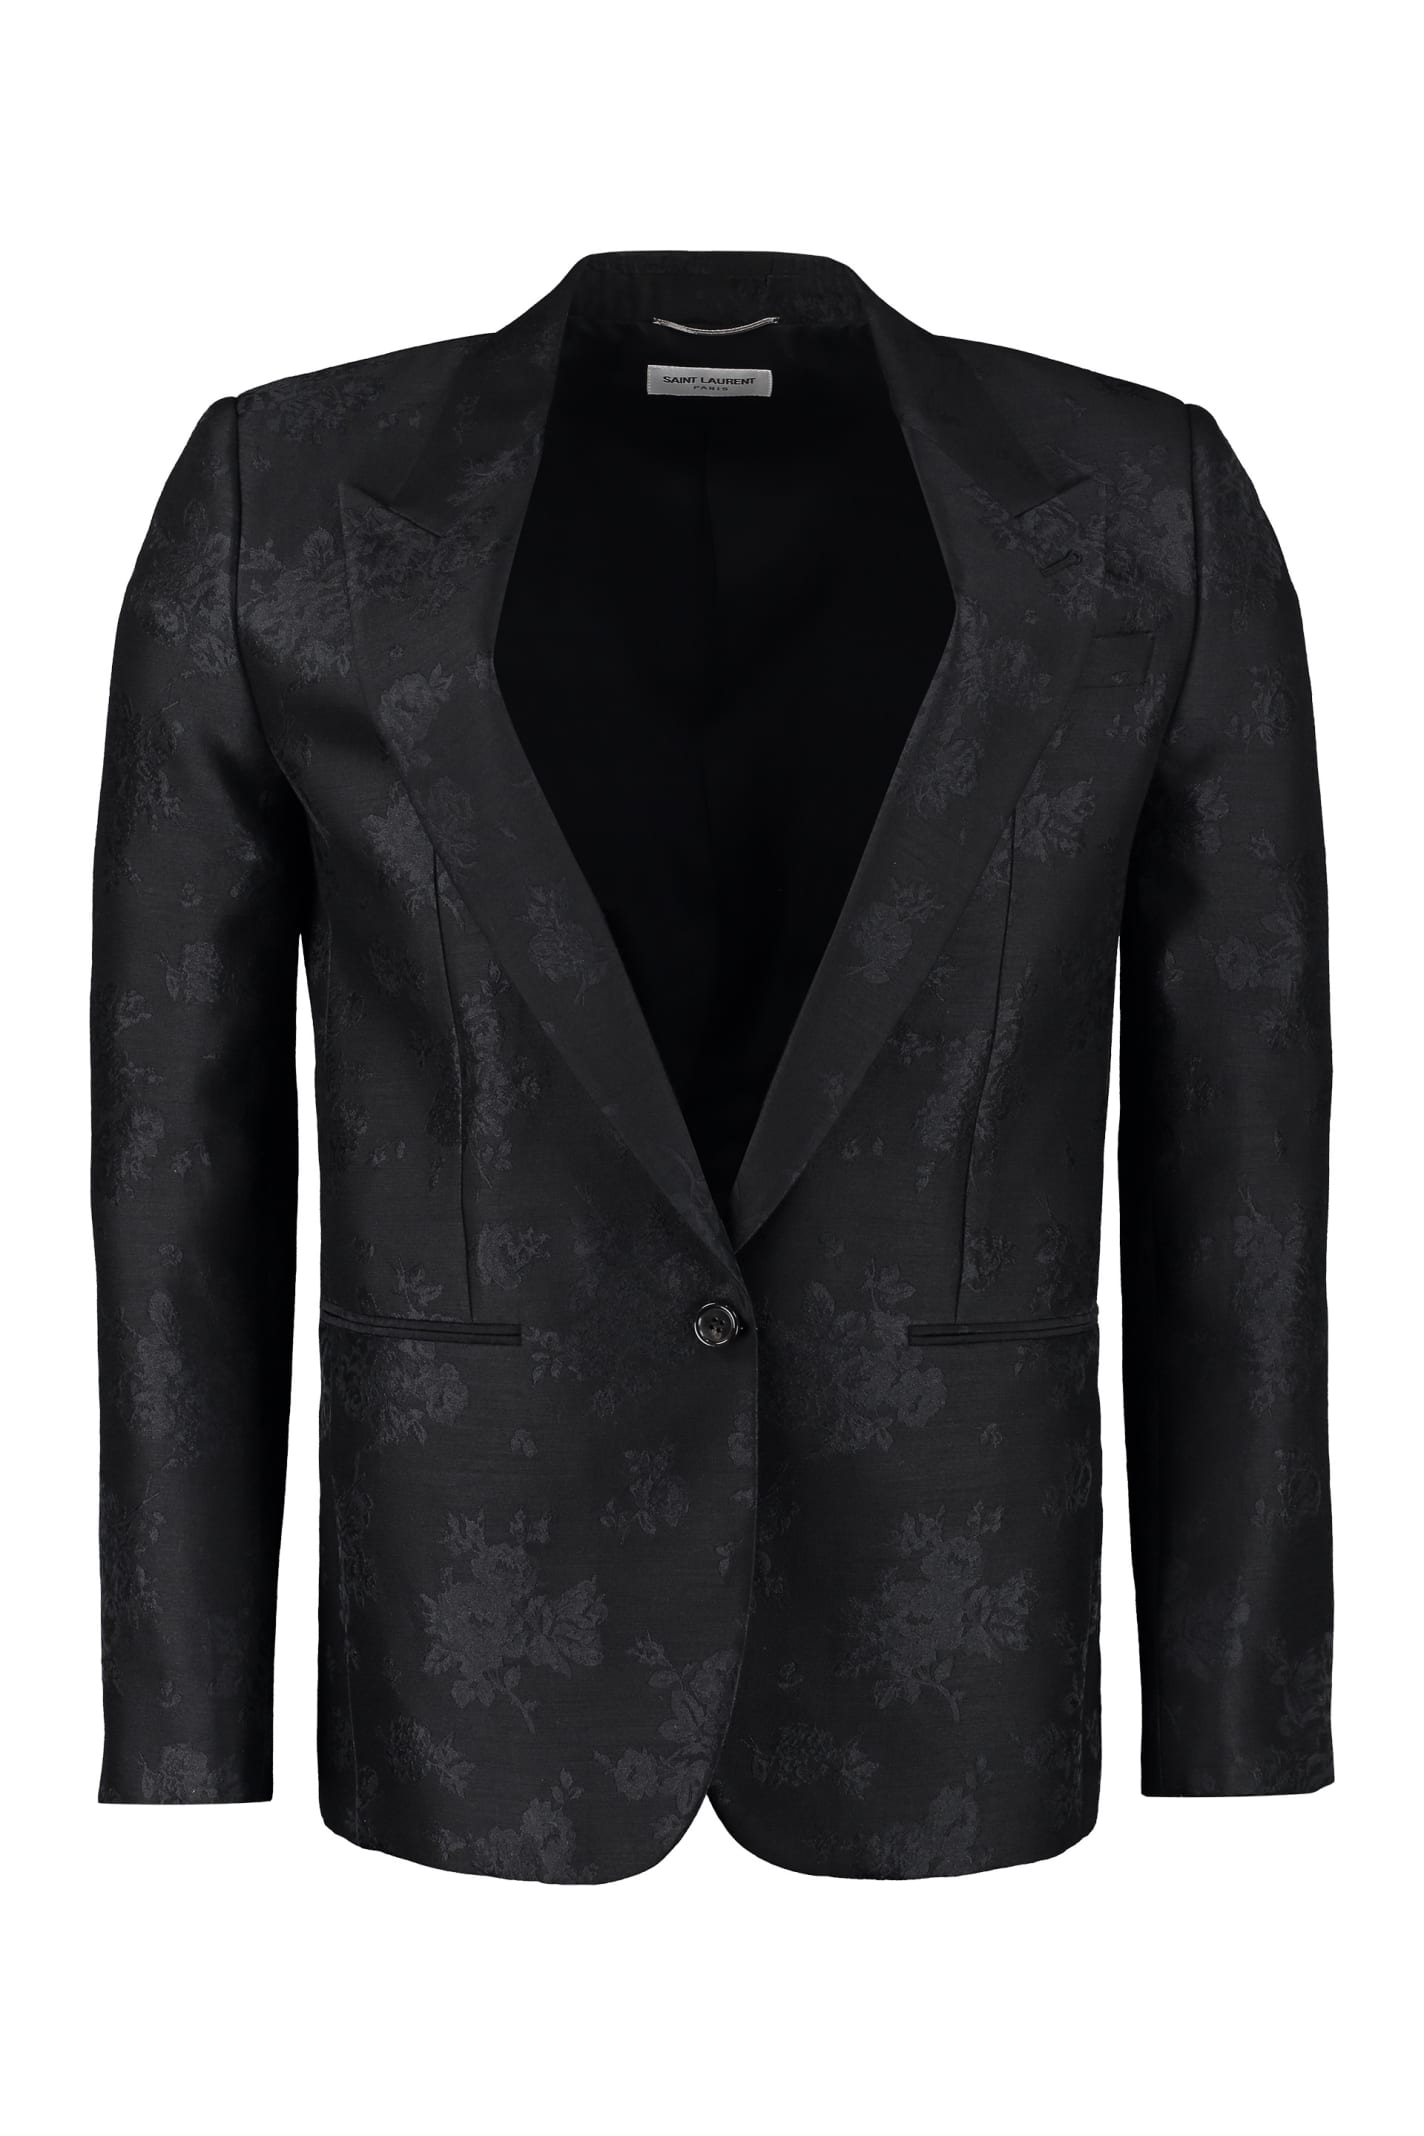 Saint Laurent Single-breasted One Button Jacket